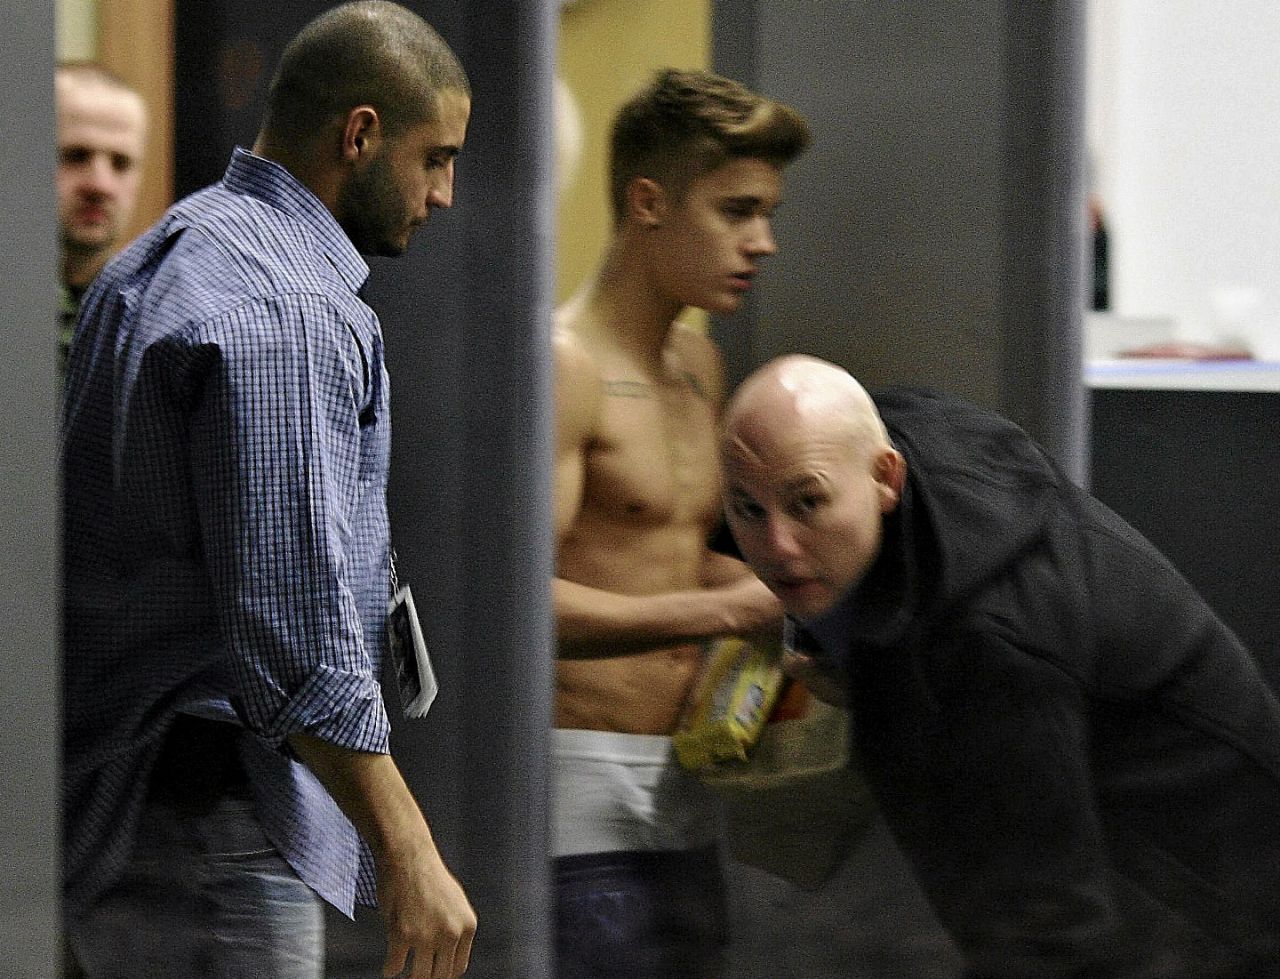 After he was <a href="http://marquee.blogs.cnn.com/2013/03/11/olivia-wilde-talks-beliebers-hilarious-abuse/">ragged on by Wilde</a> for going topless in London, Bieber strolled through a Polish airport terminal sans shirt on March 25, 2013.